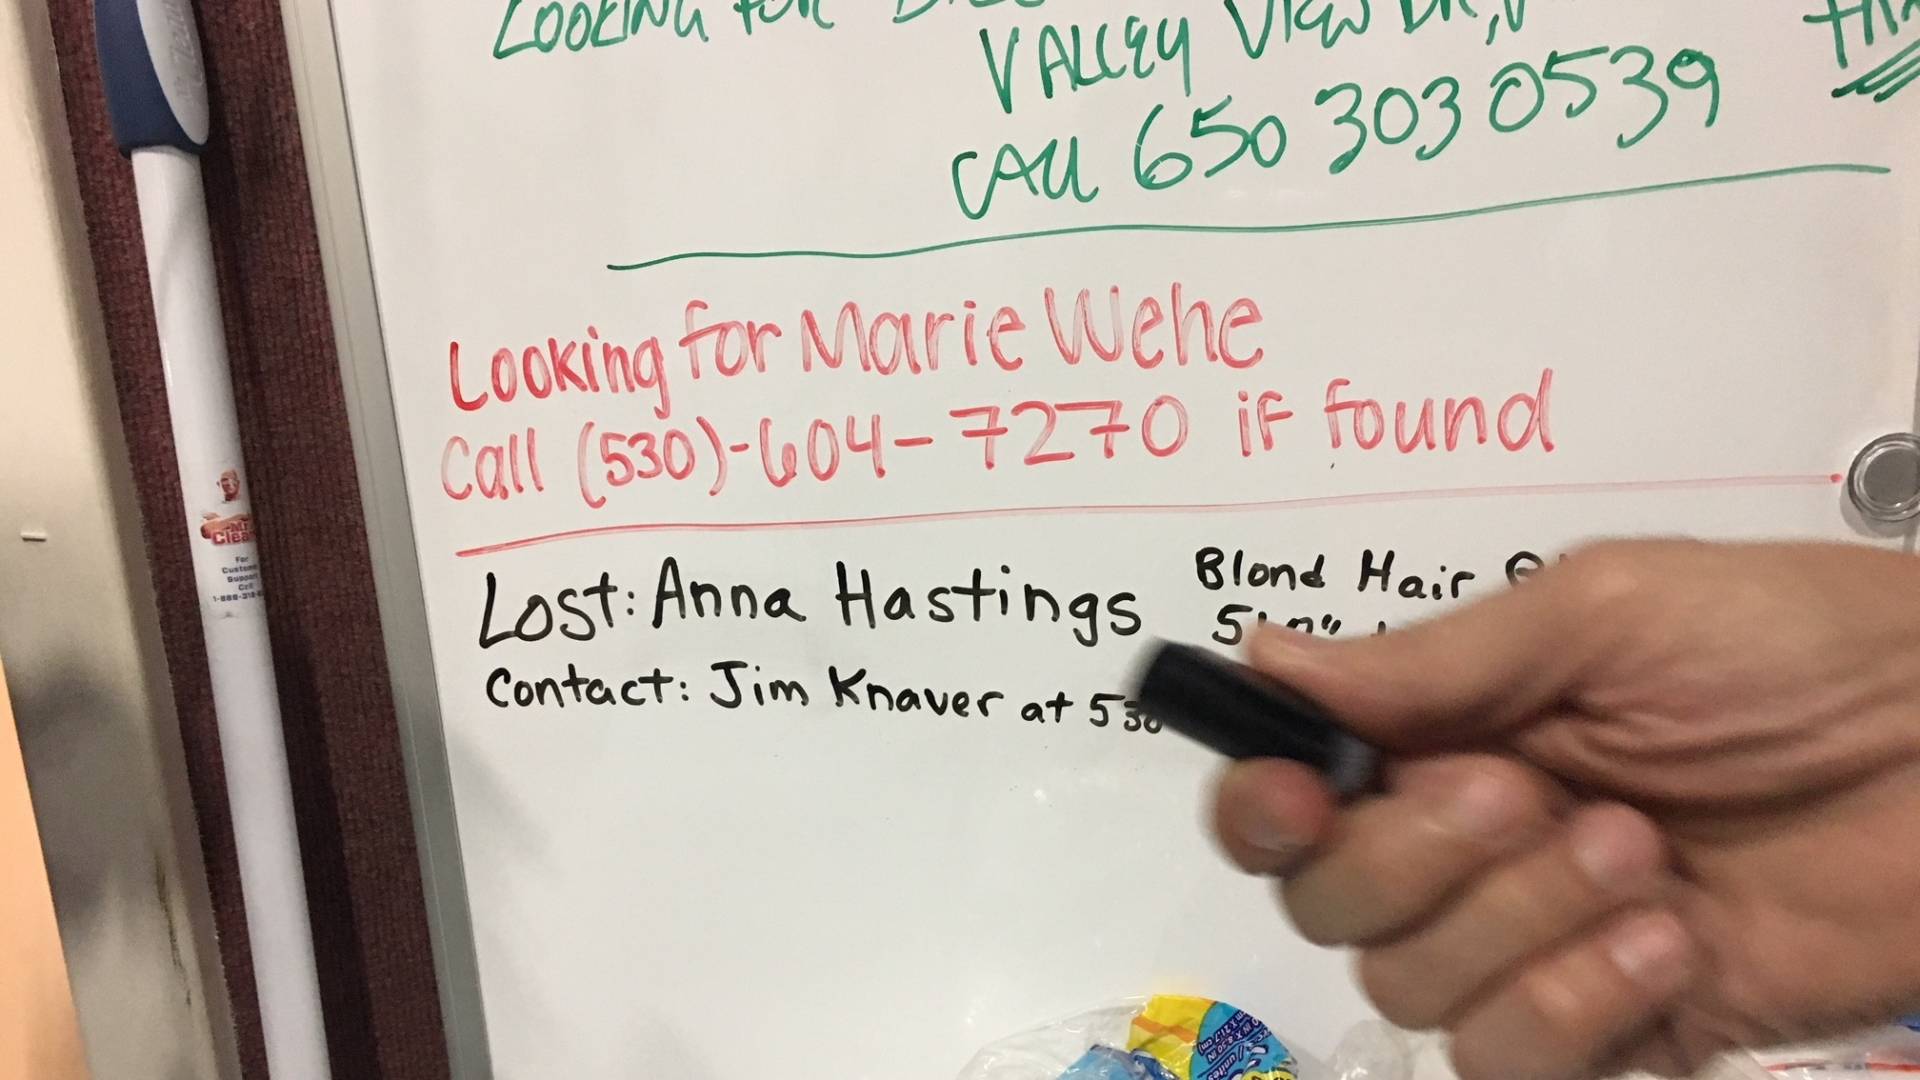 Jim Knaver adds the name of his wife, Anna, to a whiteboard at an evacuation center in Chico, Calif.